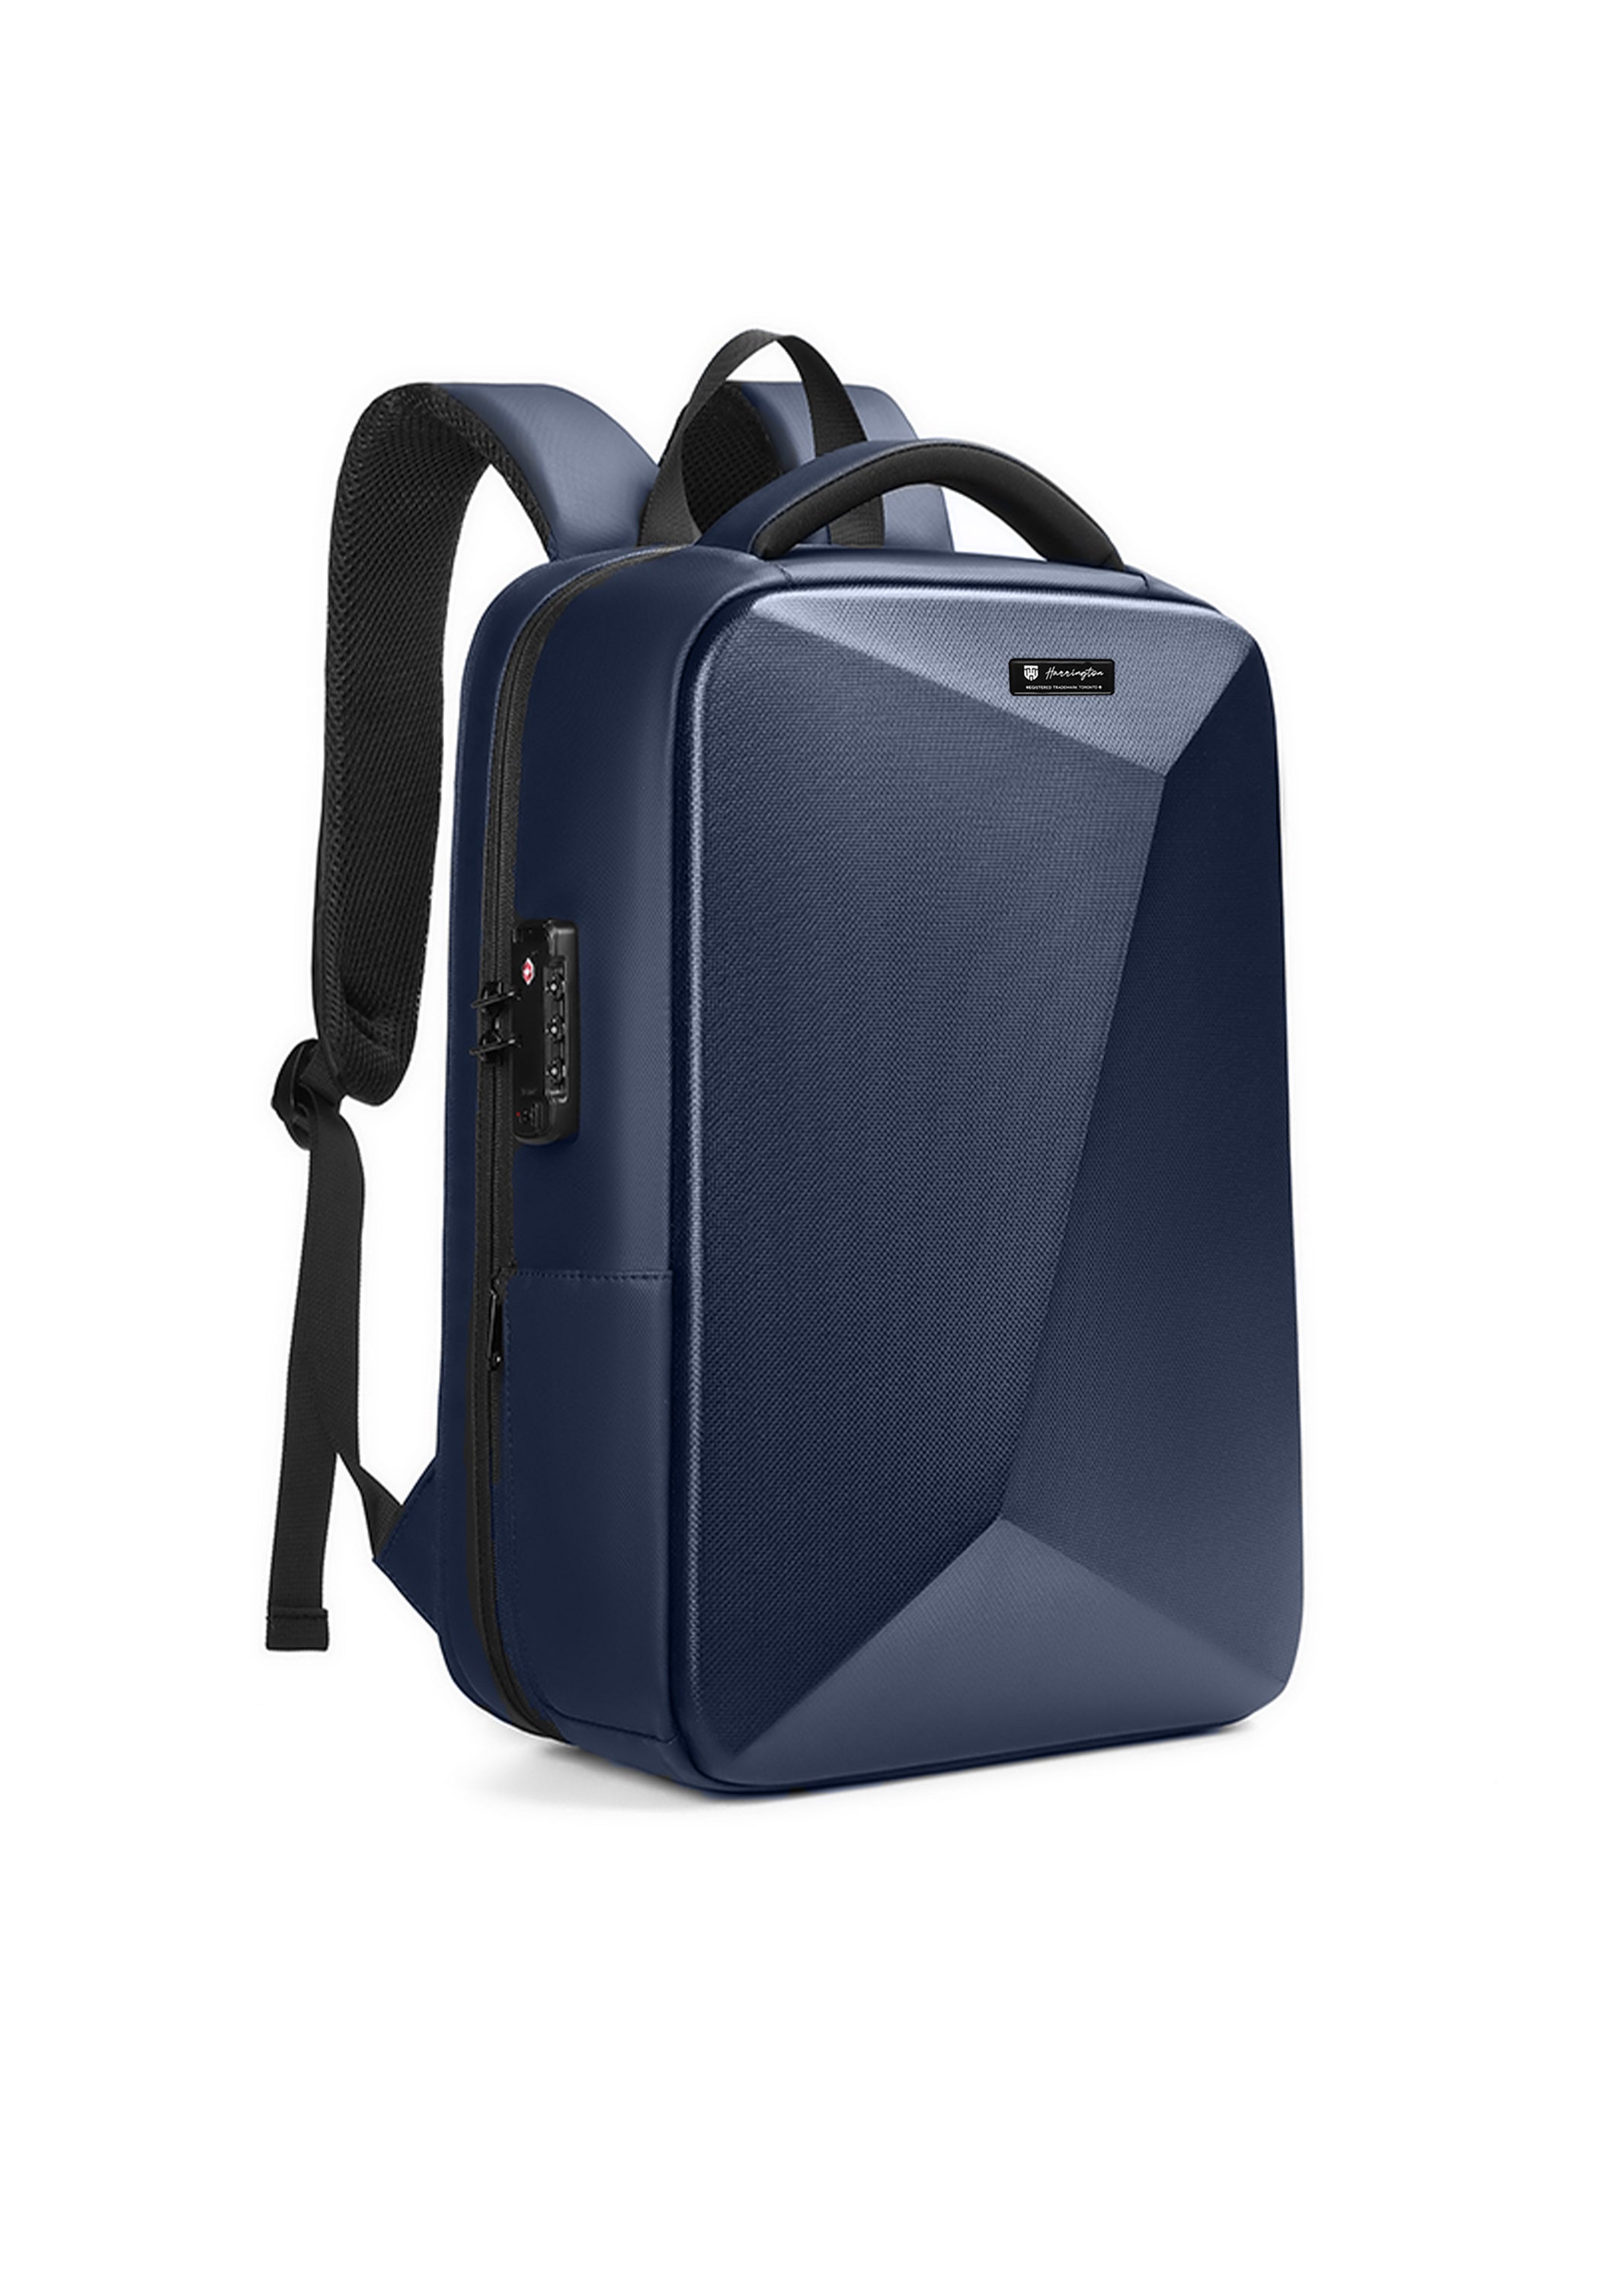 VOYAGER NAVY HARD SHELL BACKPACK